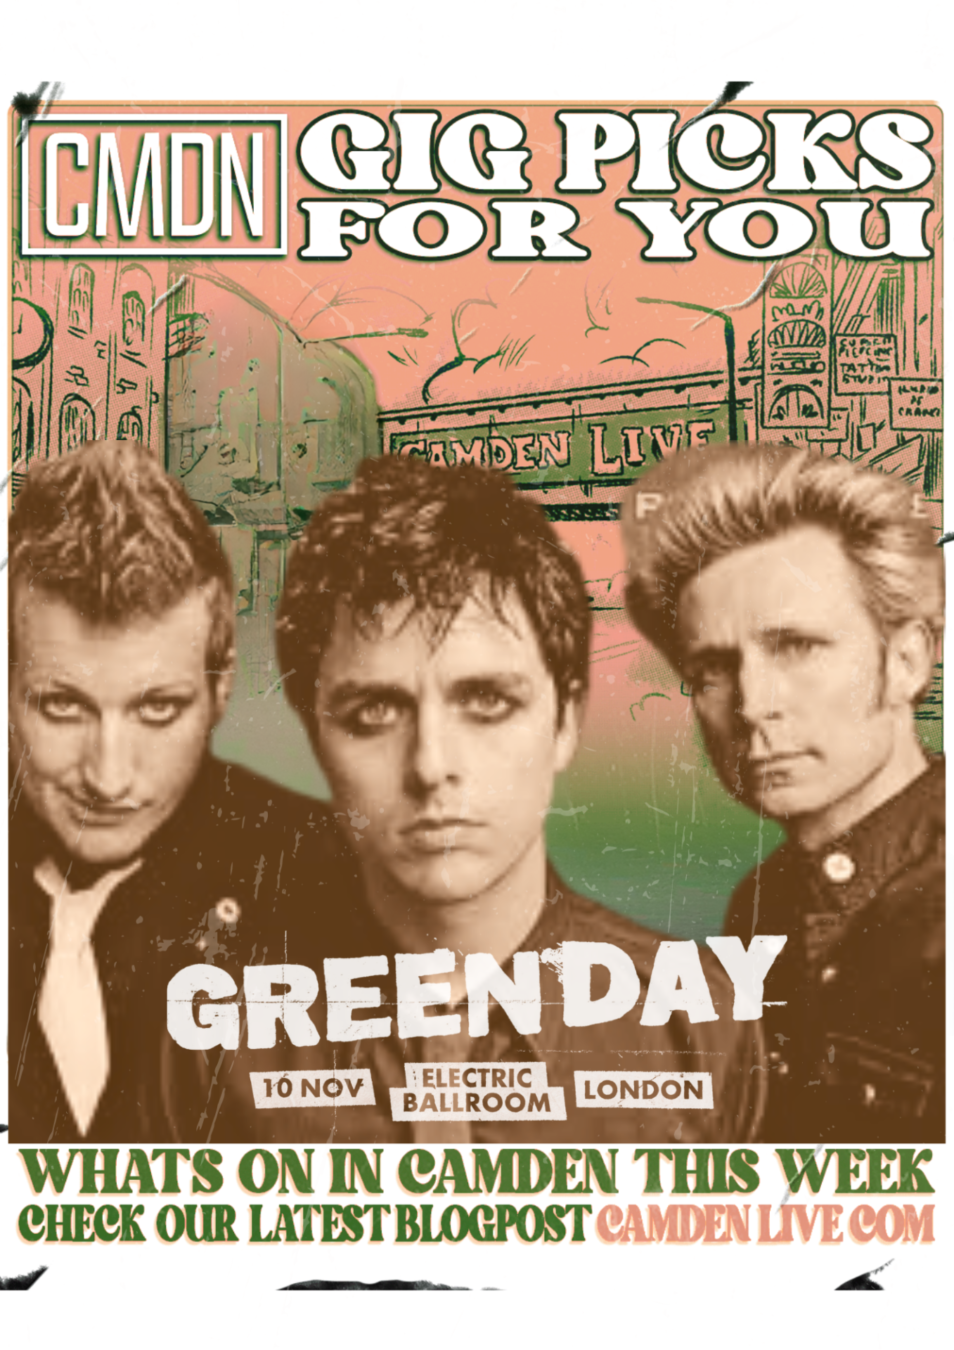 Green Day's Surprise Concert in Camden, London: Get Your Tickets Before The Deadline!